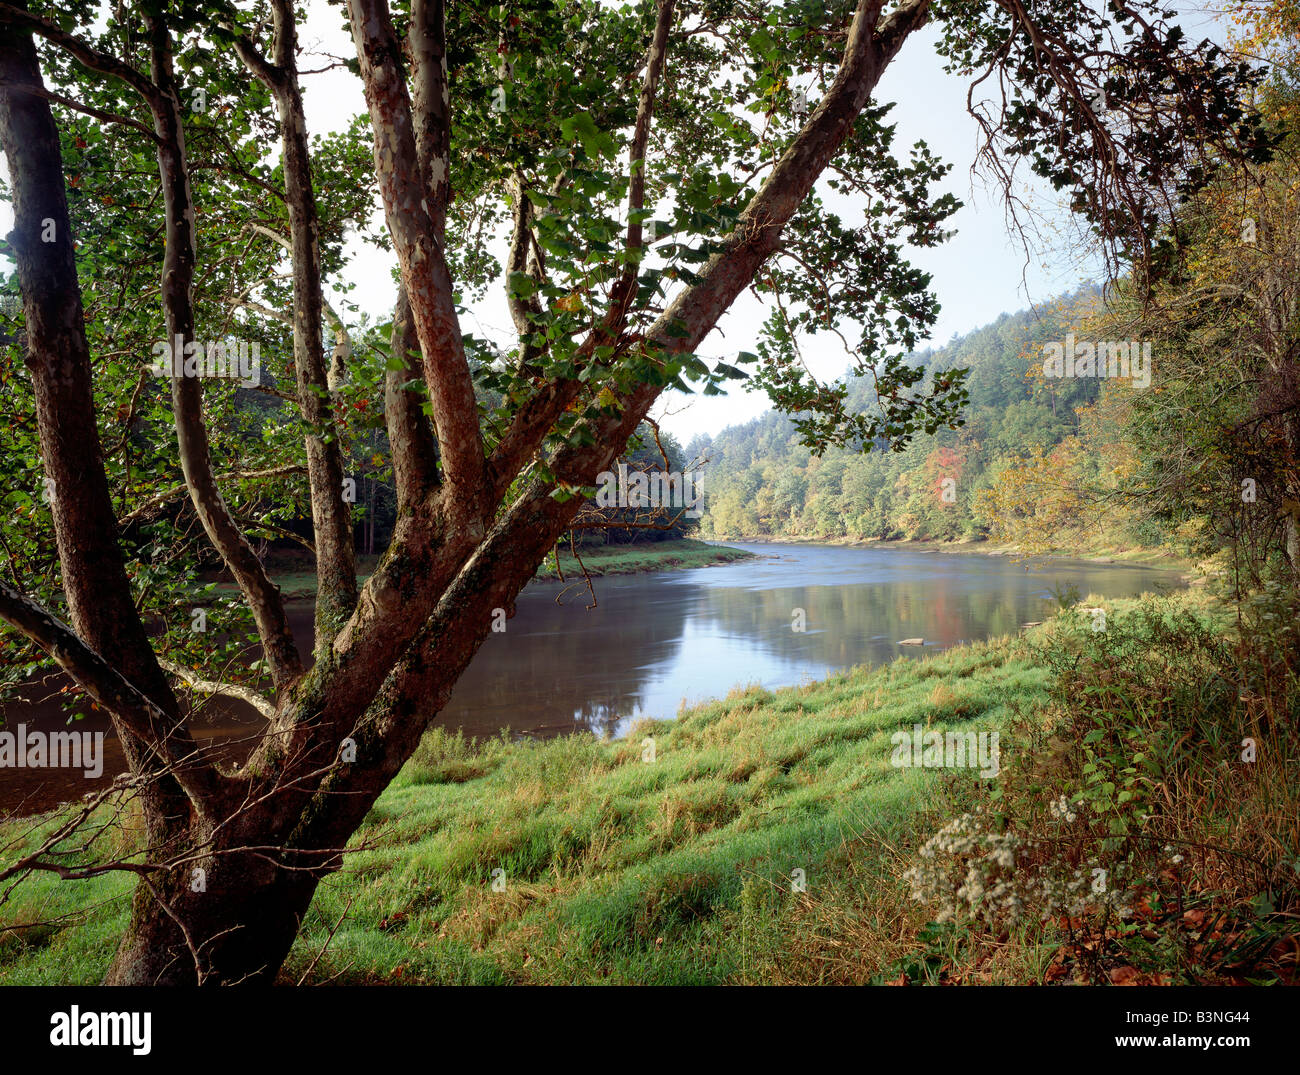 SUMMER VIEW OF SYCAMORE TREE, CLARION RIVER, COOK FOREST STATE PARK, PENNSYLVANIA, USA Stock Photo